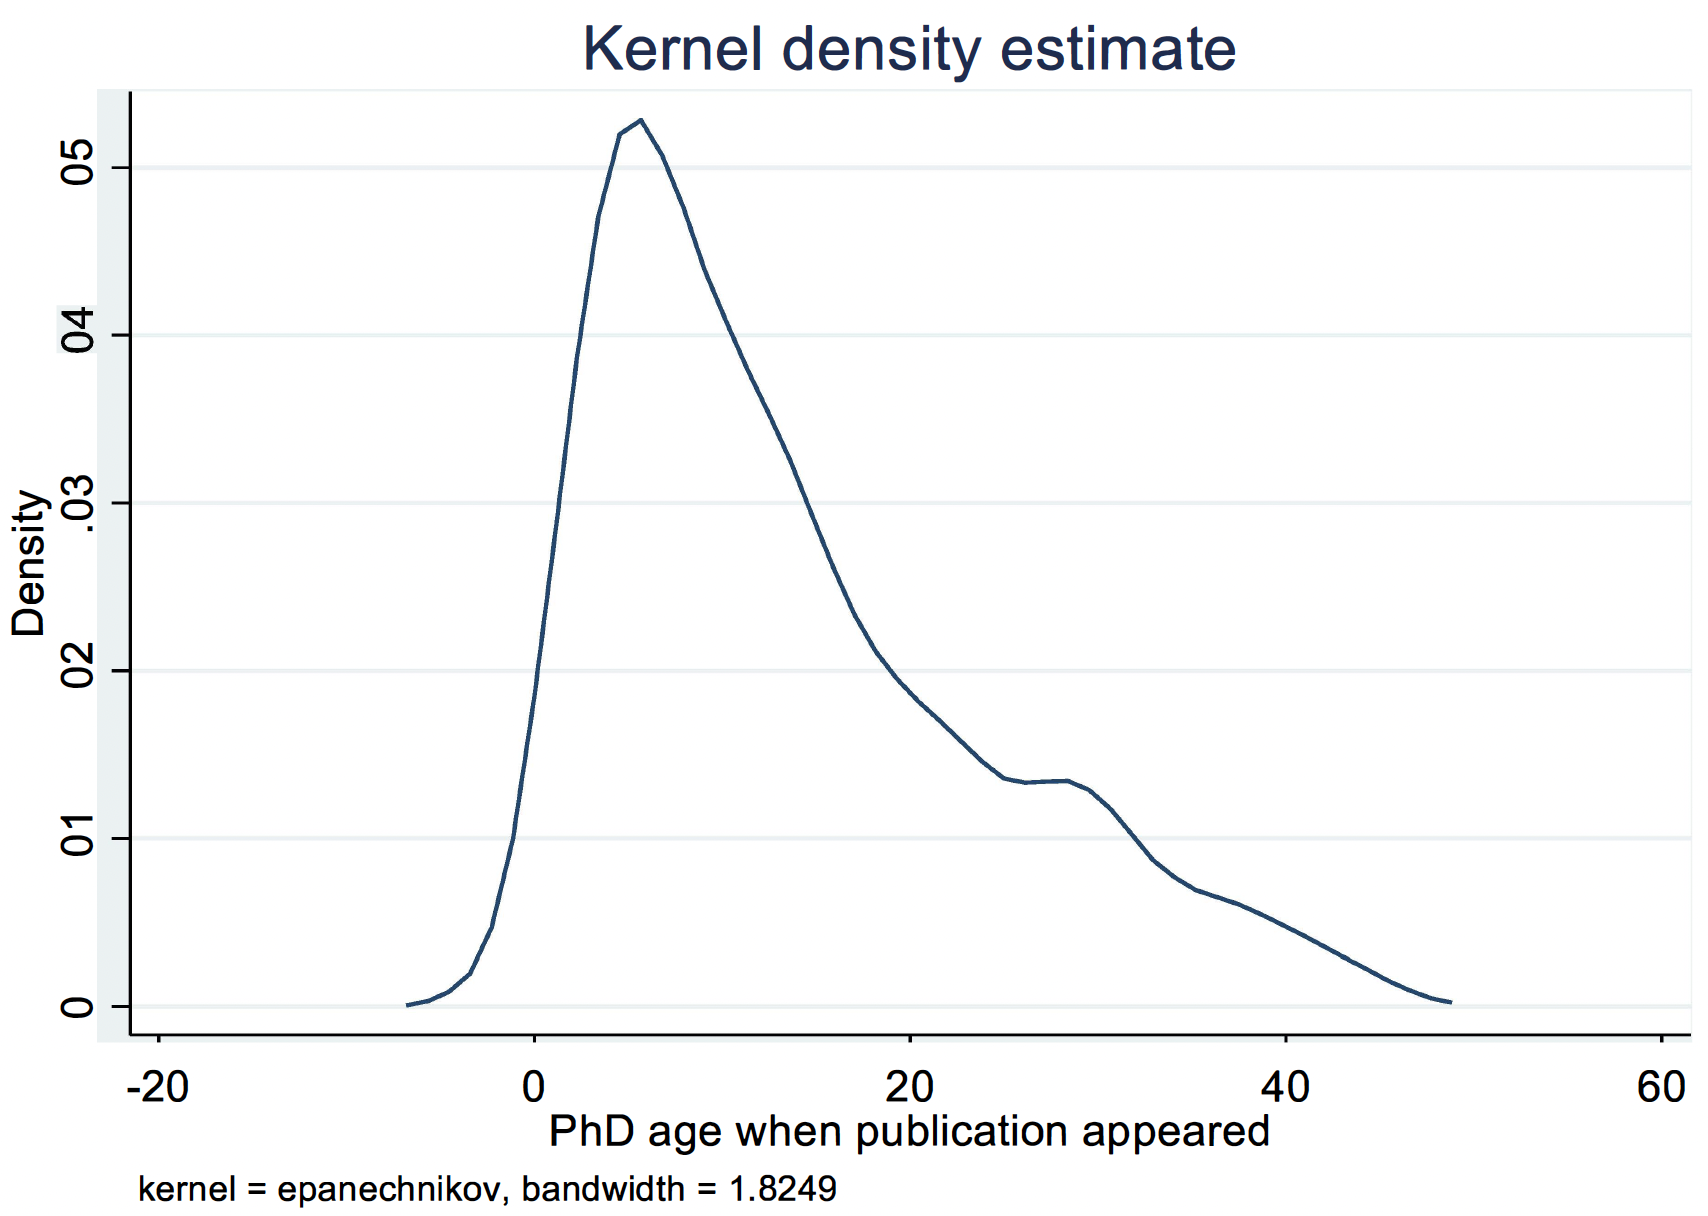 Figure 1 Kernel density estimate of the distribution of authors’ PhD ages, star authors 1969–78 cohort, ‘Top Five’ journals, 1969–2018